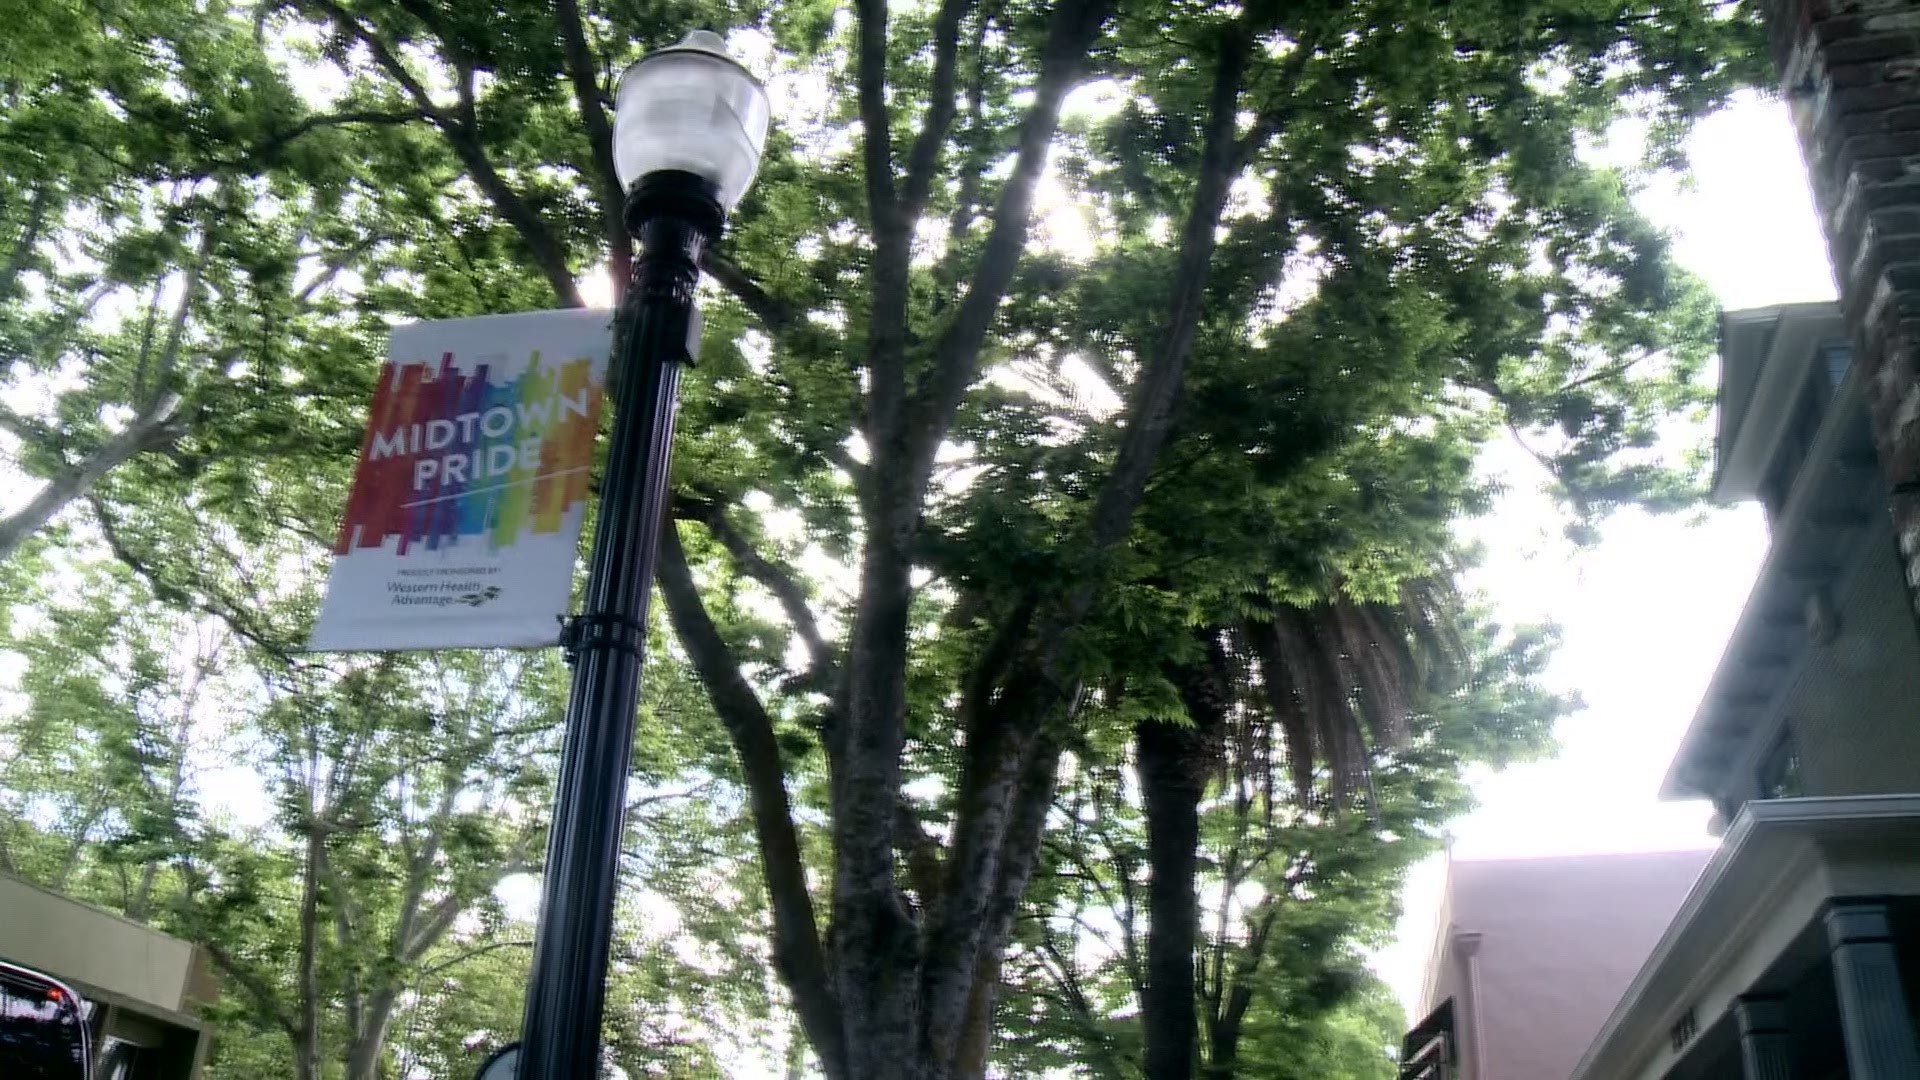 Midtown Pride banners will remain up through the end of June to show support for the LGBT community in Sacramento.